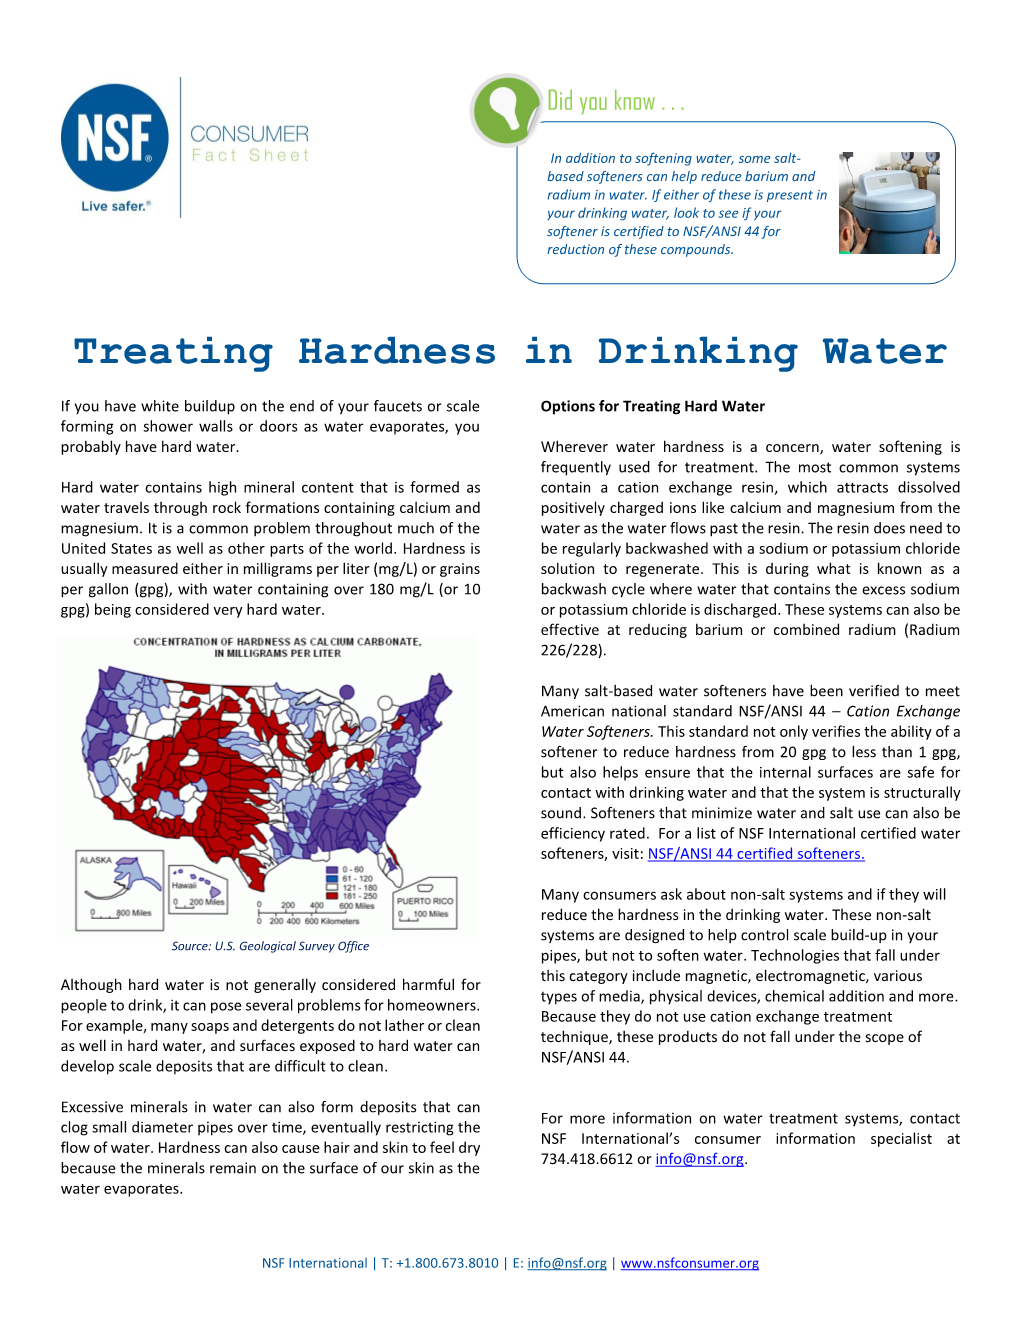 Treating Hardness in Drinking Water